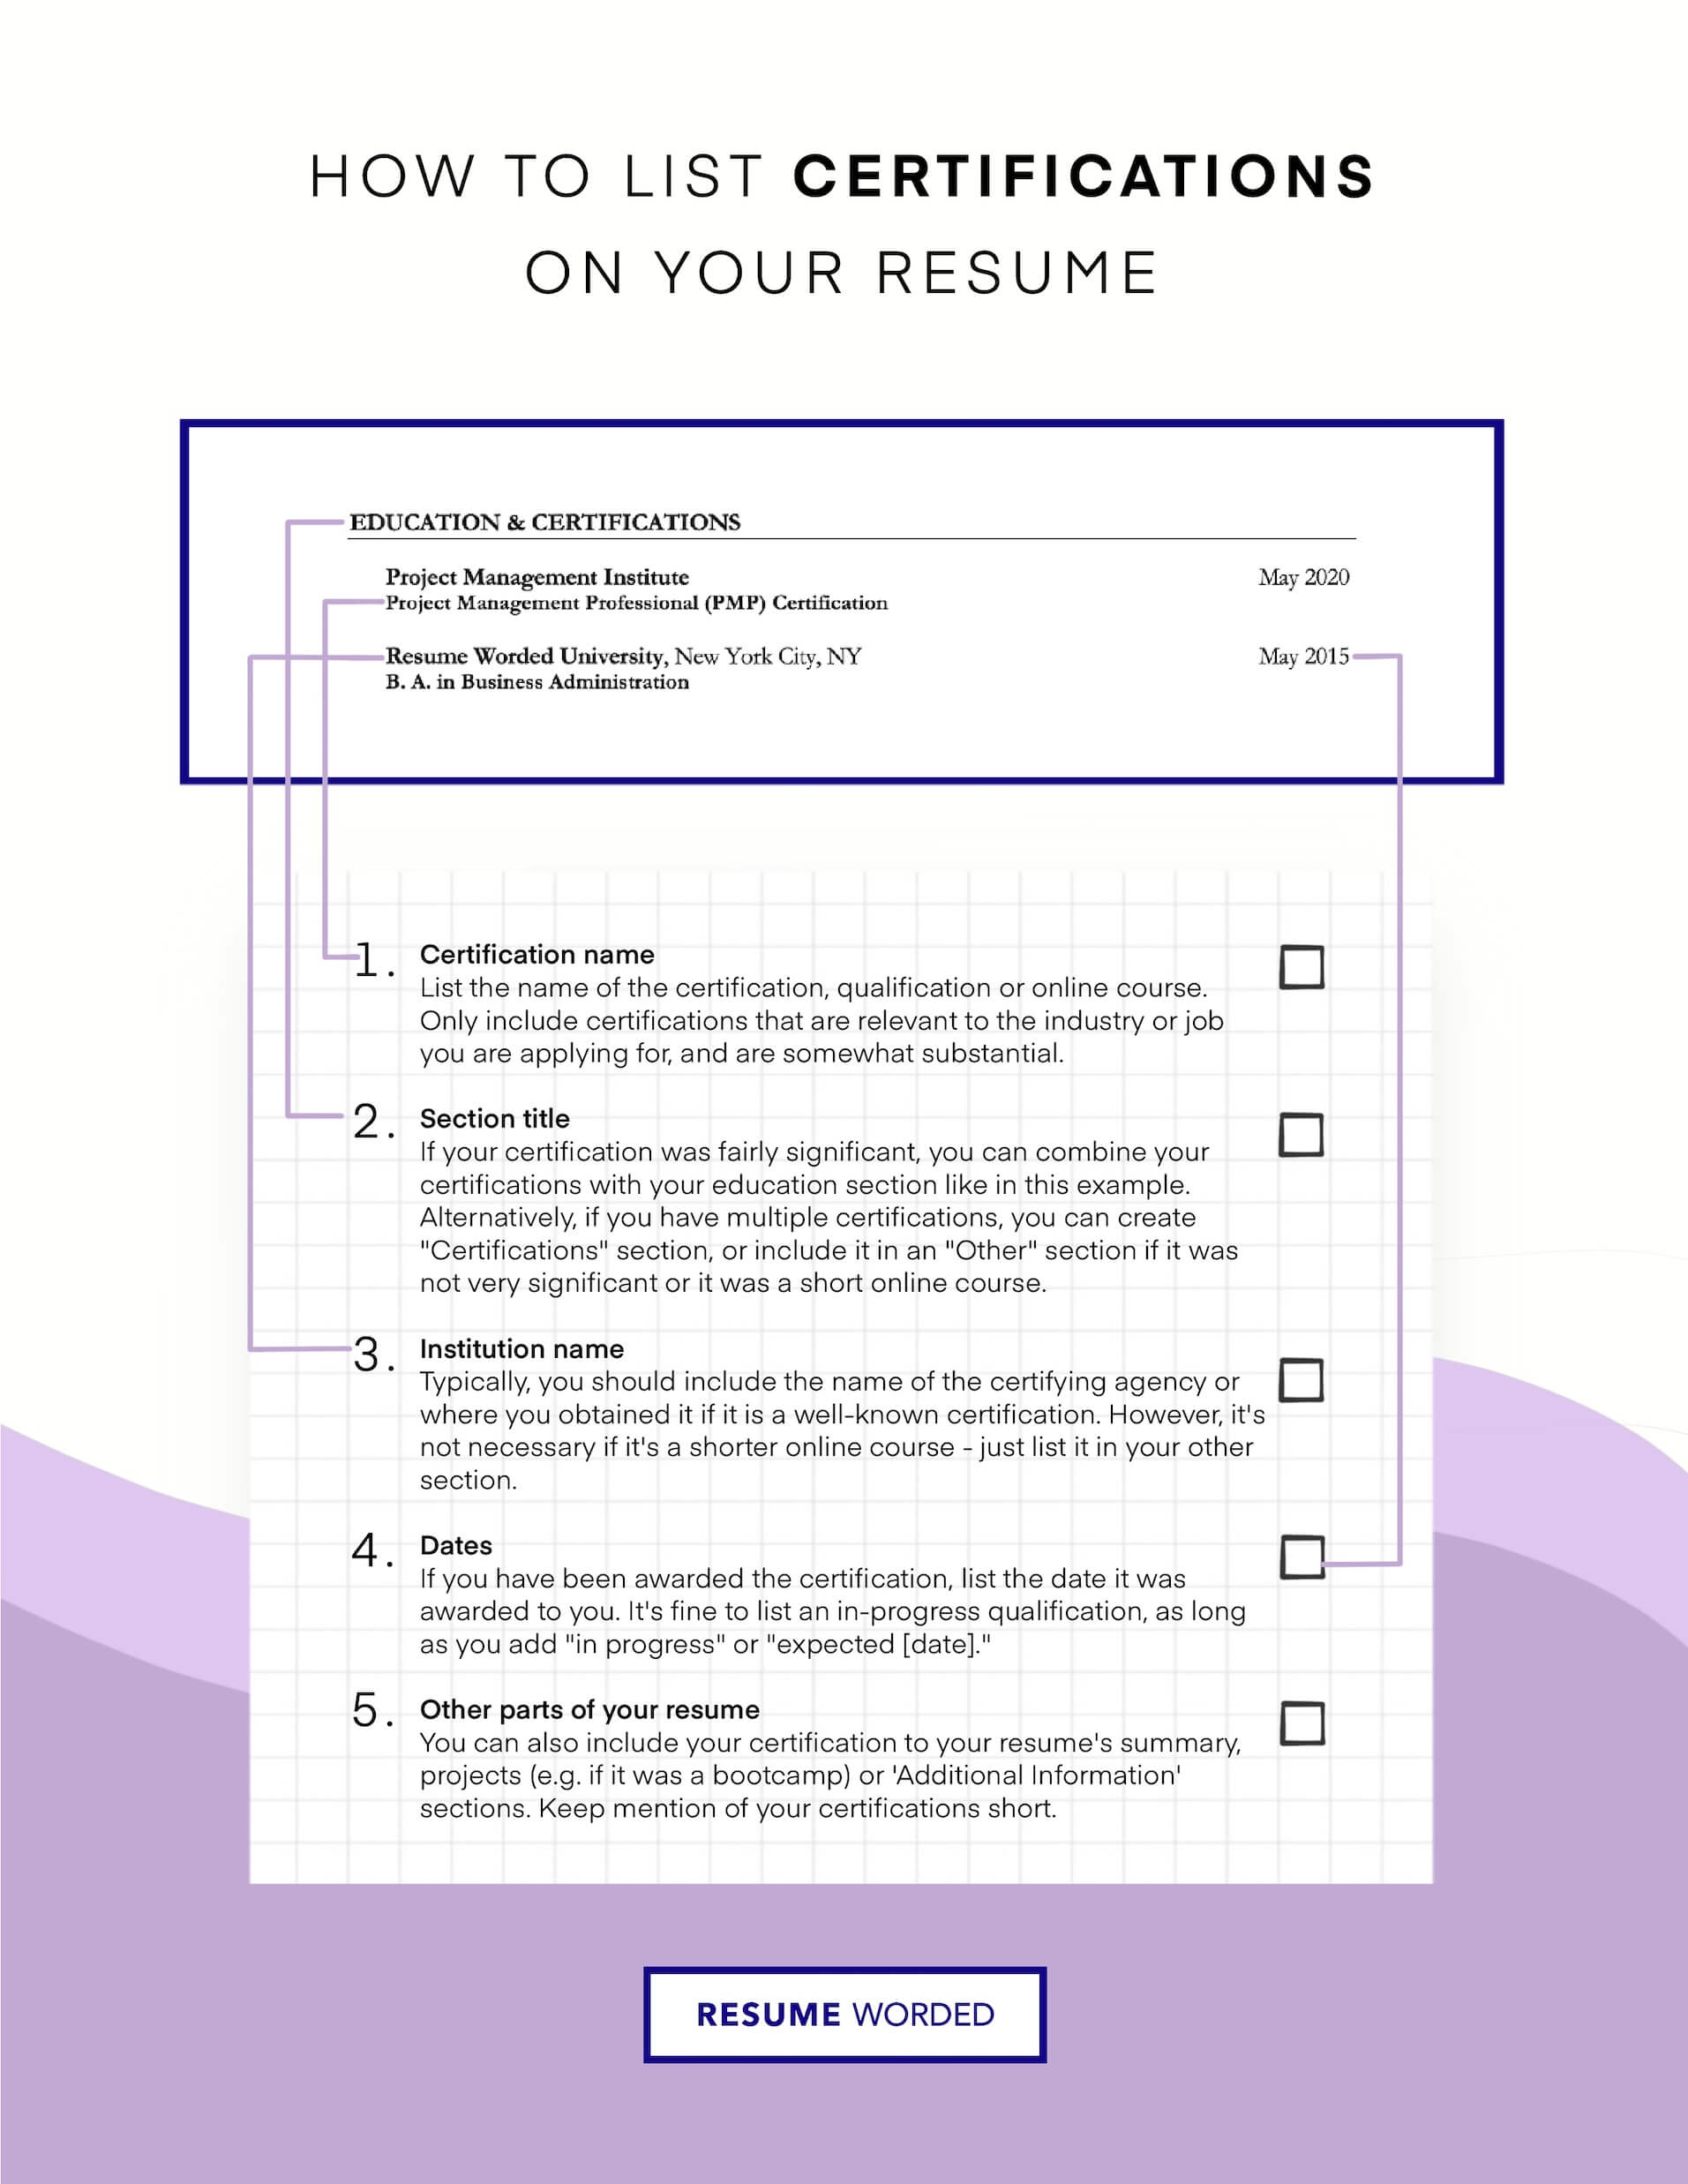 Get as many analyst-related certifications as possible. - Junior Business Analyst Resume